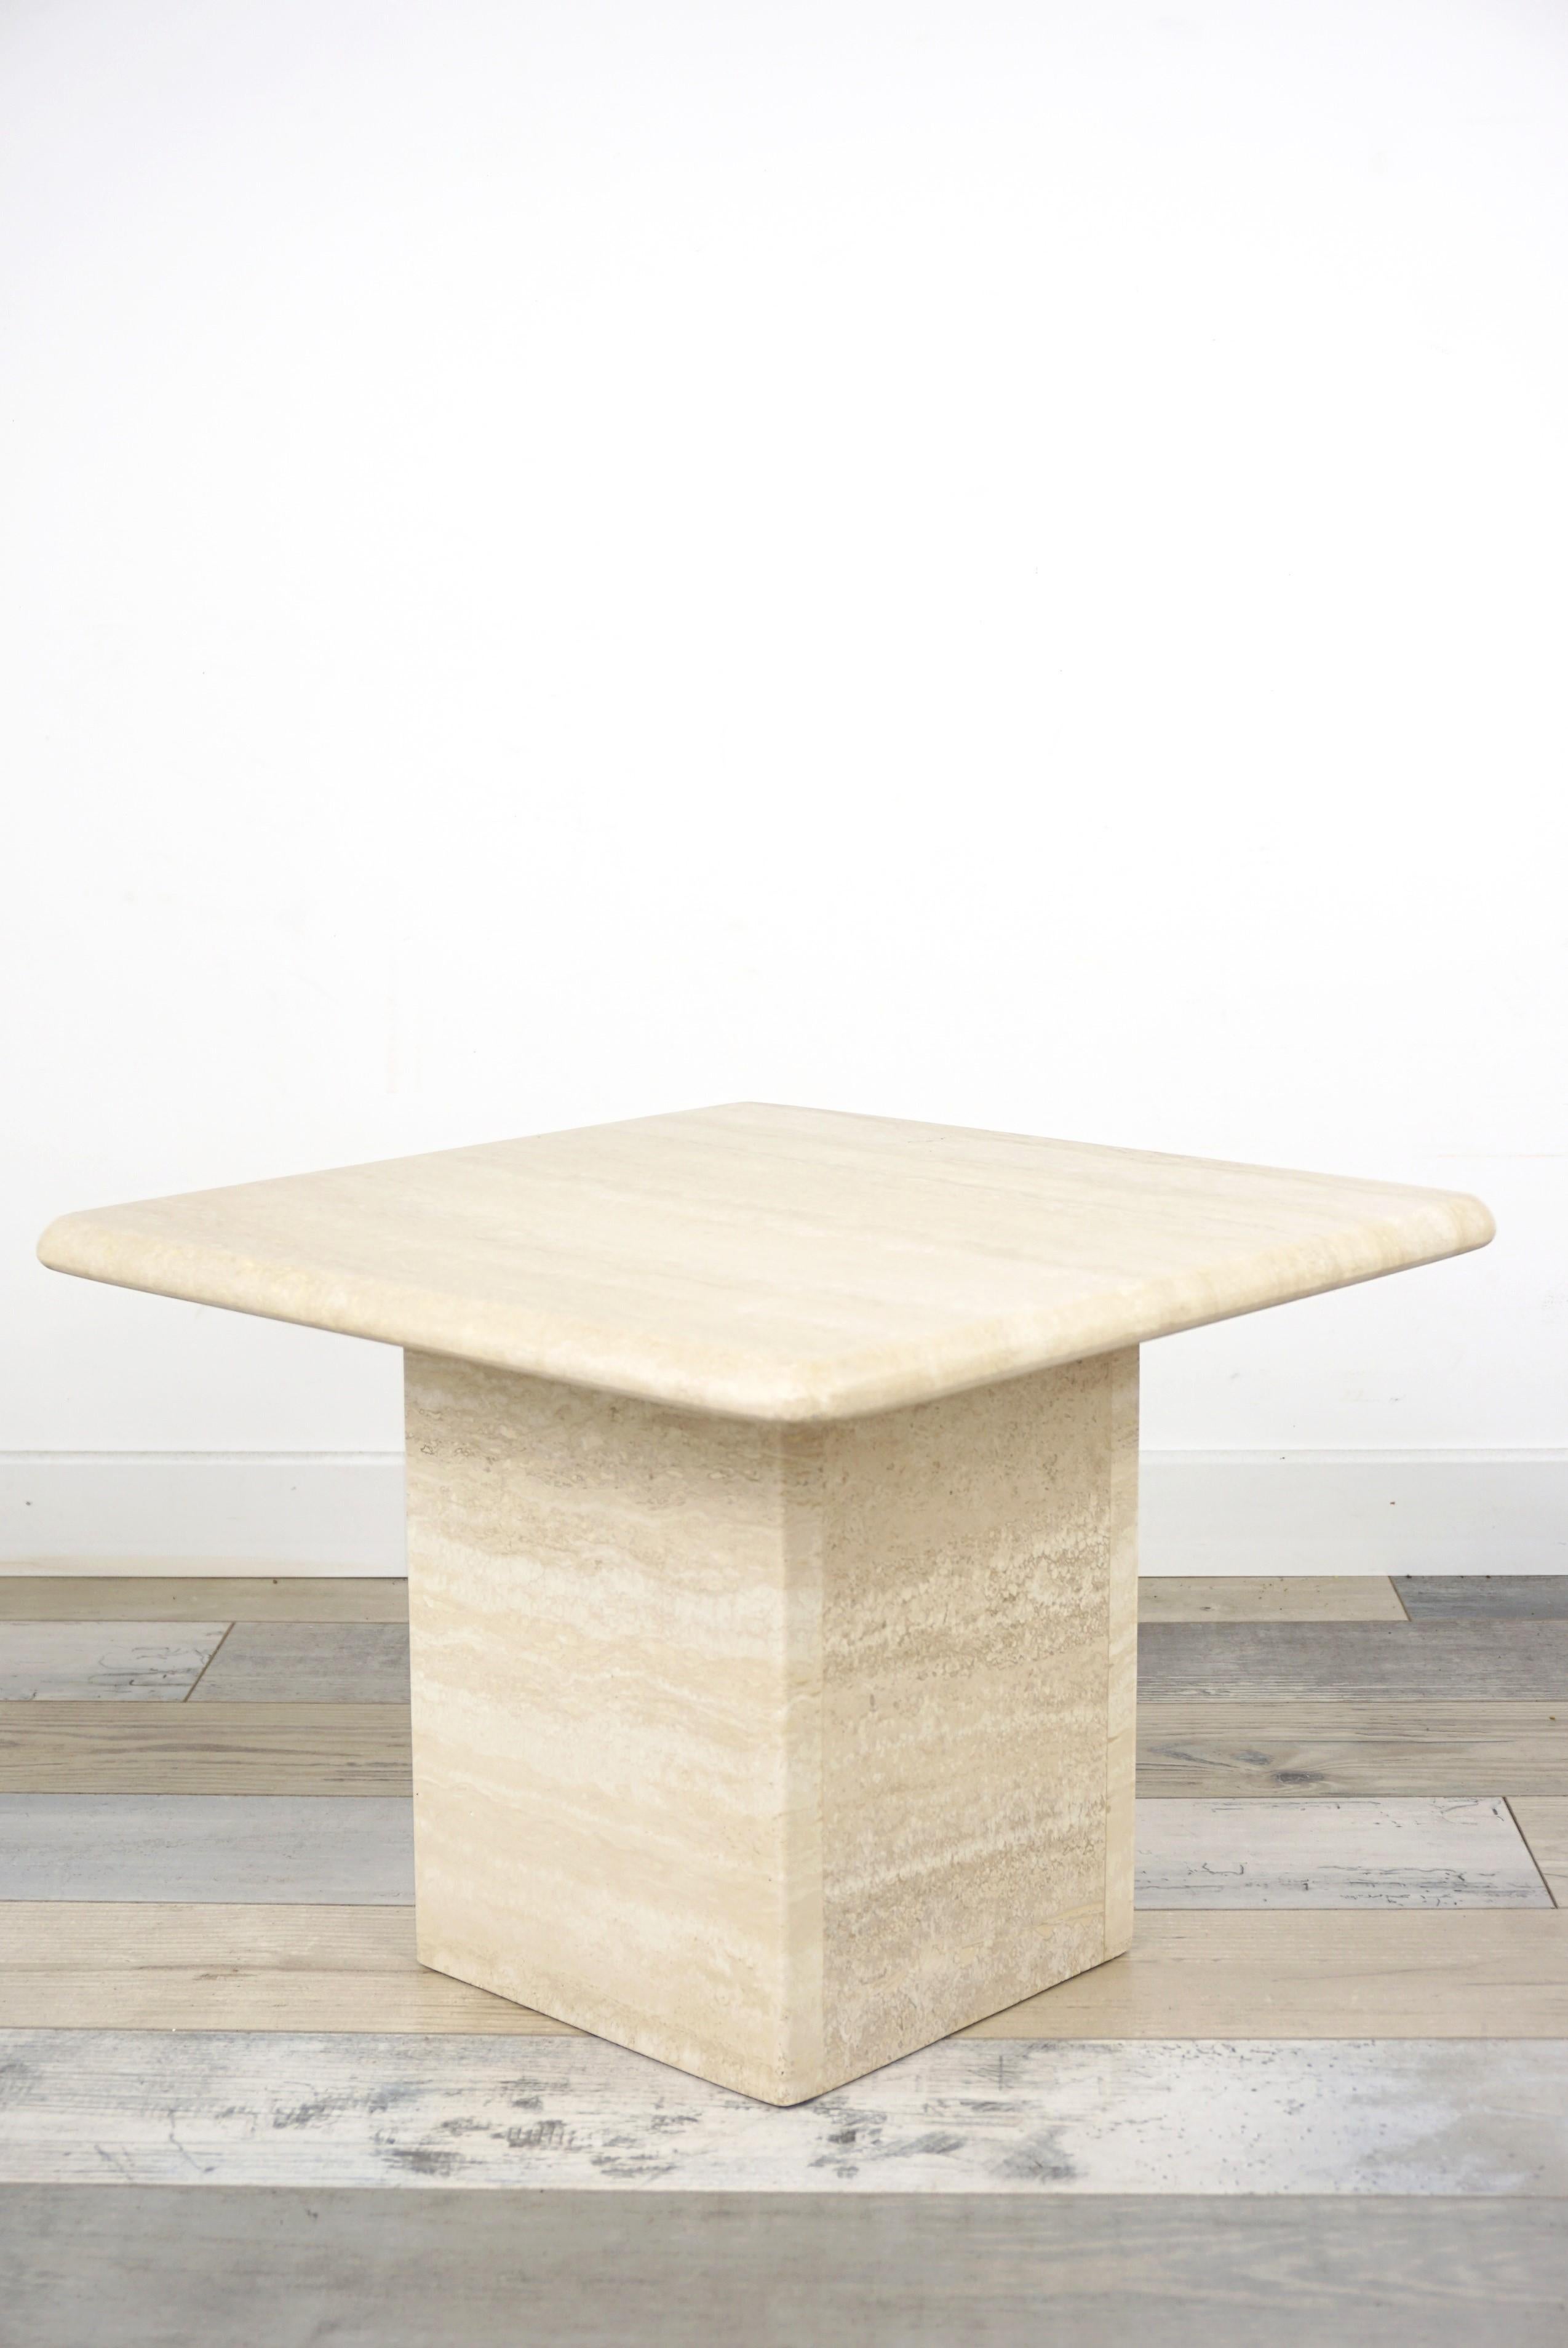 Travertine coffee table, which will find its place in the living room as an side table, at the end of the sofa to put his book or his smoking tea, or even as a harness to sublimate a vase, a sculpture, a plant! In short, the Swiss army knife of the